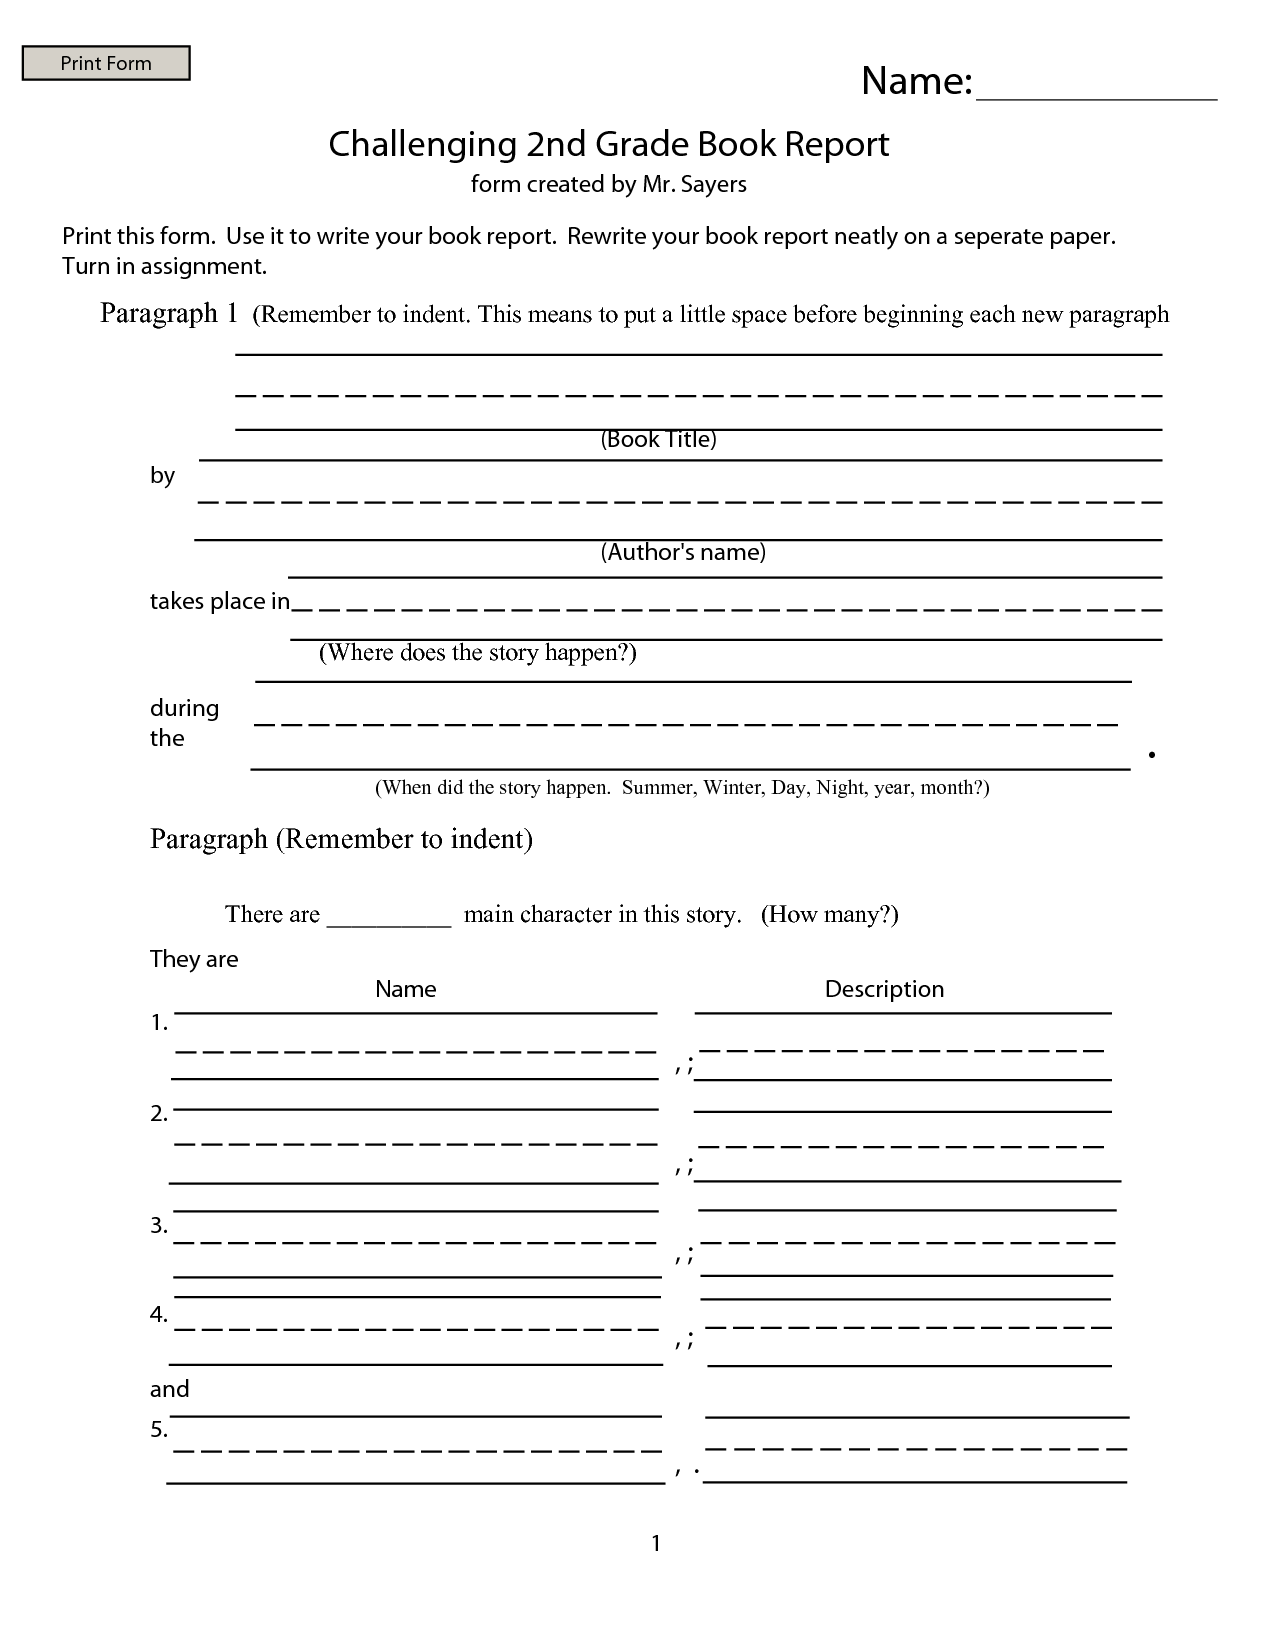 Book report template for 2nd graders